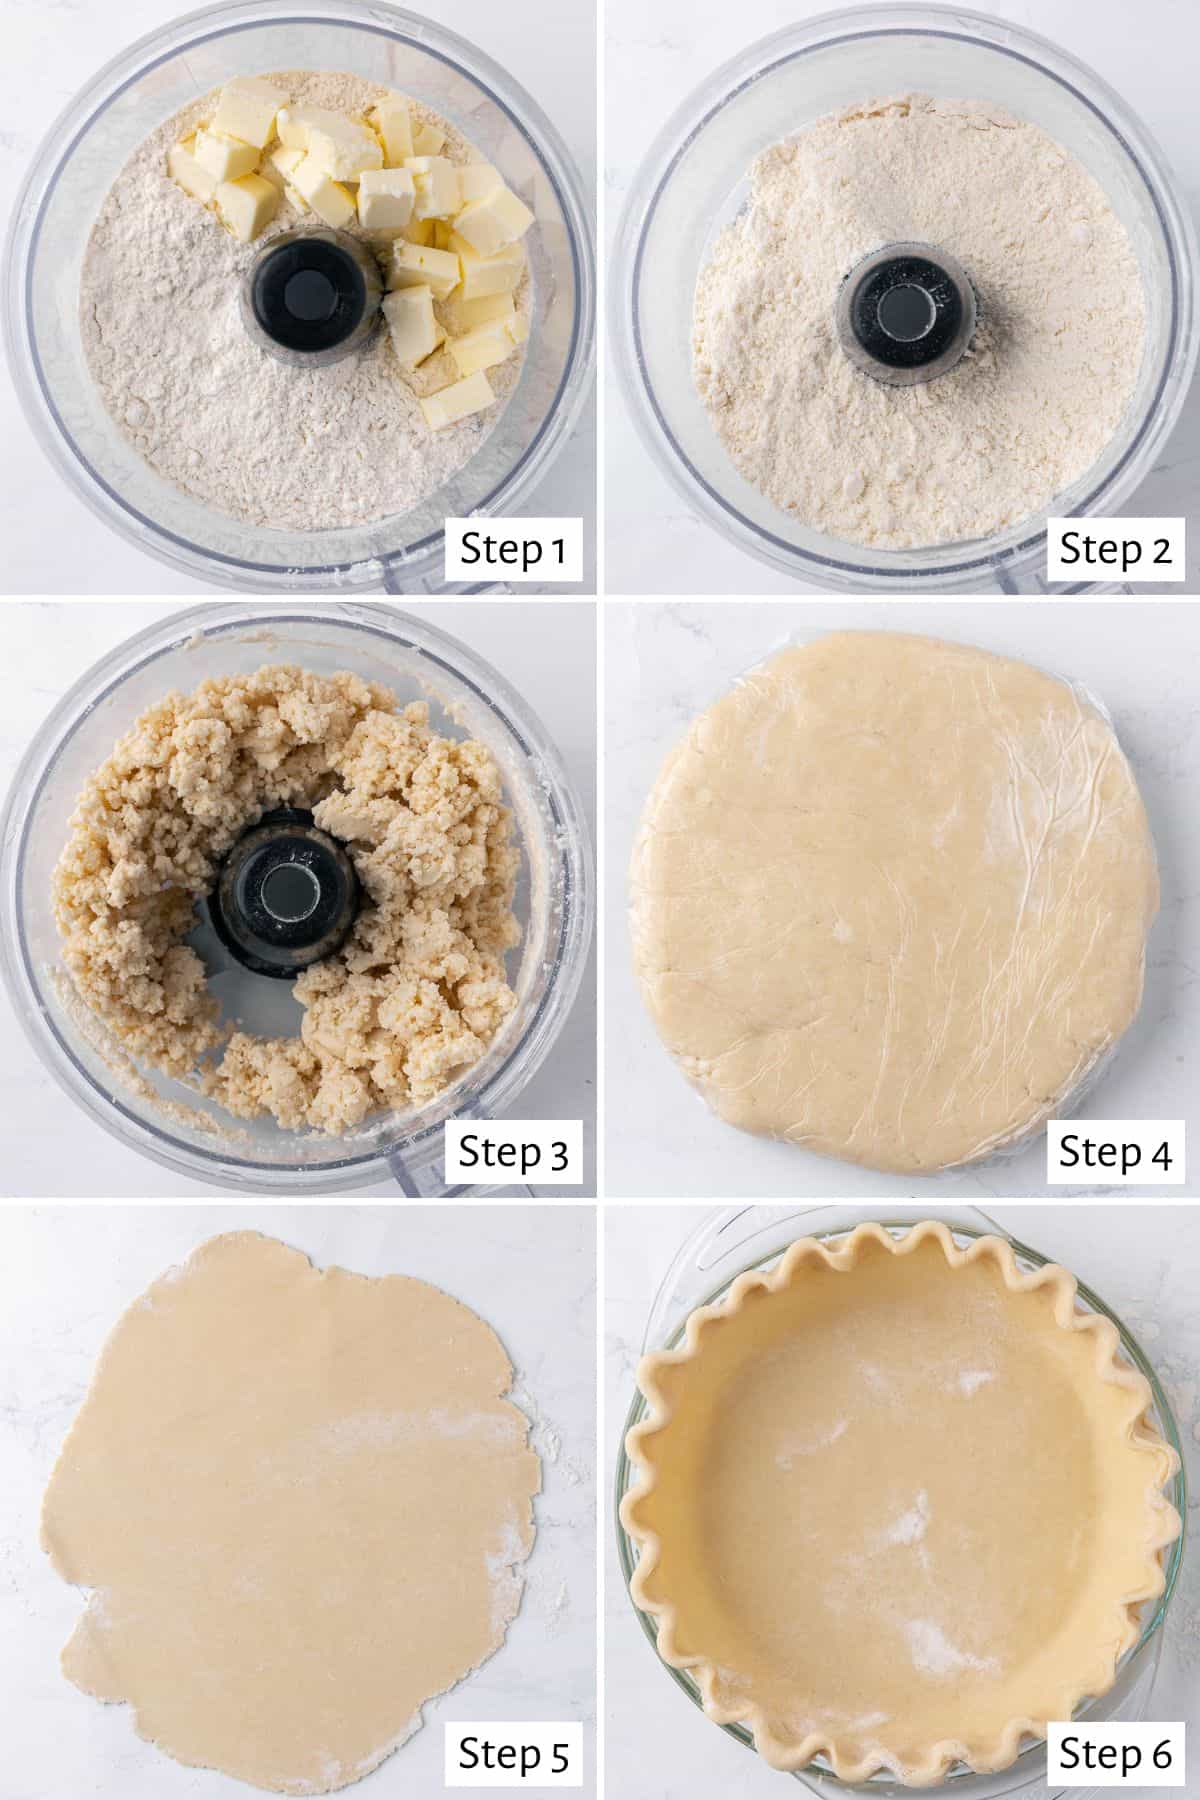 6 image collage making recipe: 1- flour and cubed butter in the bowl of a food processor before processing, 2- after processing into a small crumb, 3- after water added to show shaggy dough, 4- dough flatten into a disc and wrapped in plastic, 5- rolled out thin, 6- pressed and shaped into a glass pie plate.